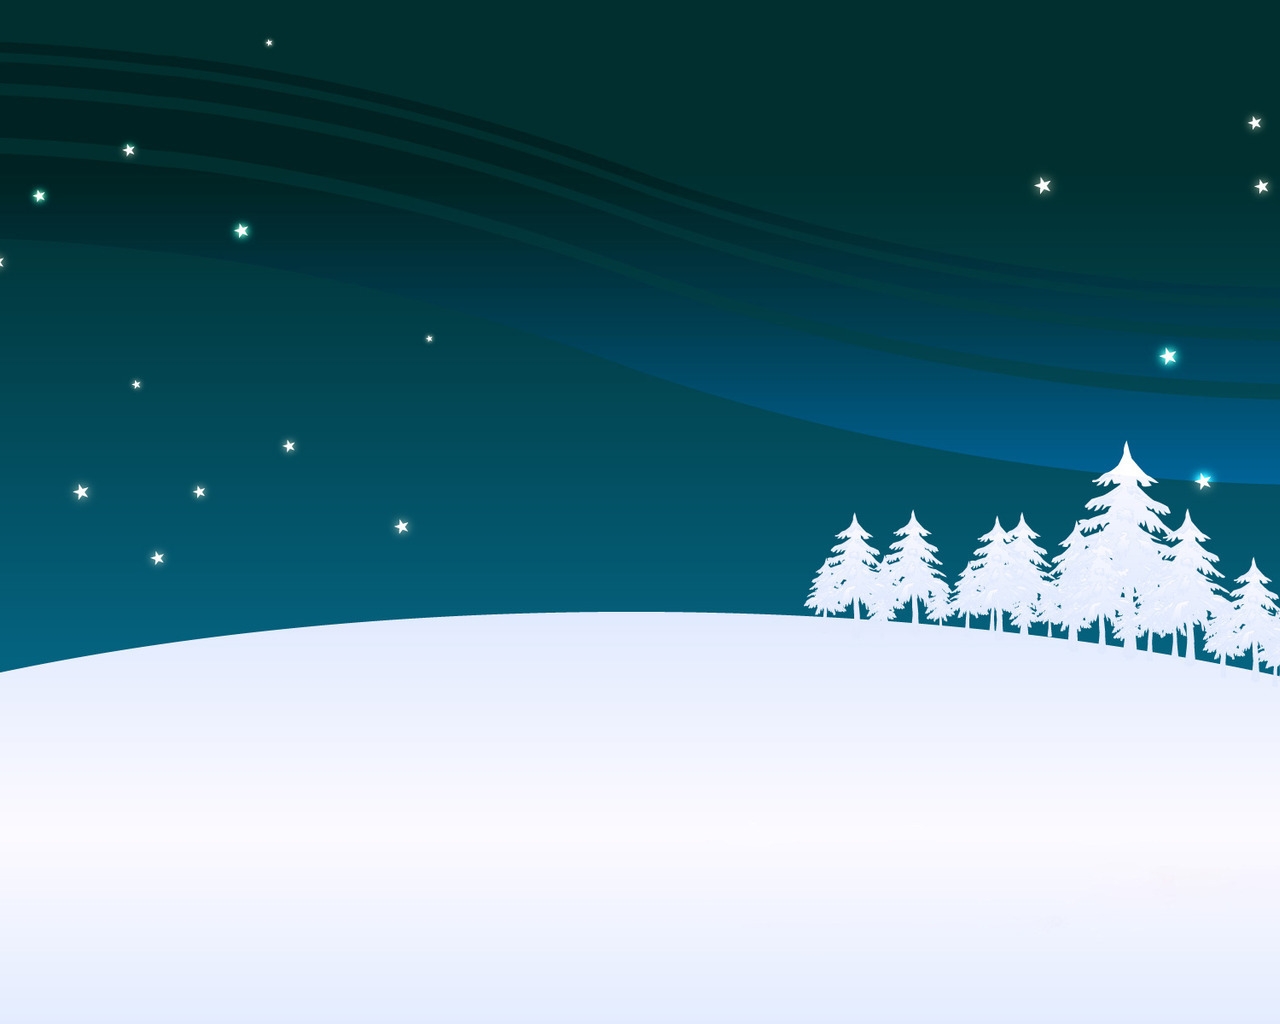 Winter landscape painting for 1280 x 1024 resolution